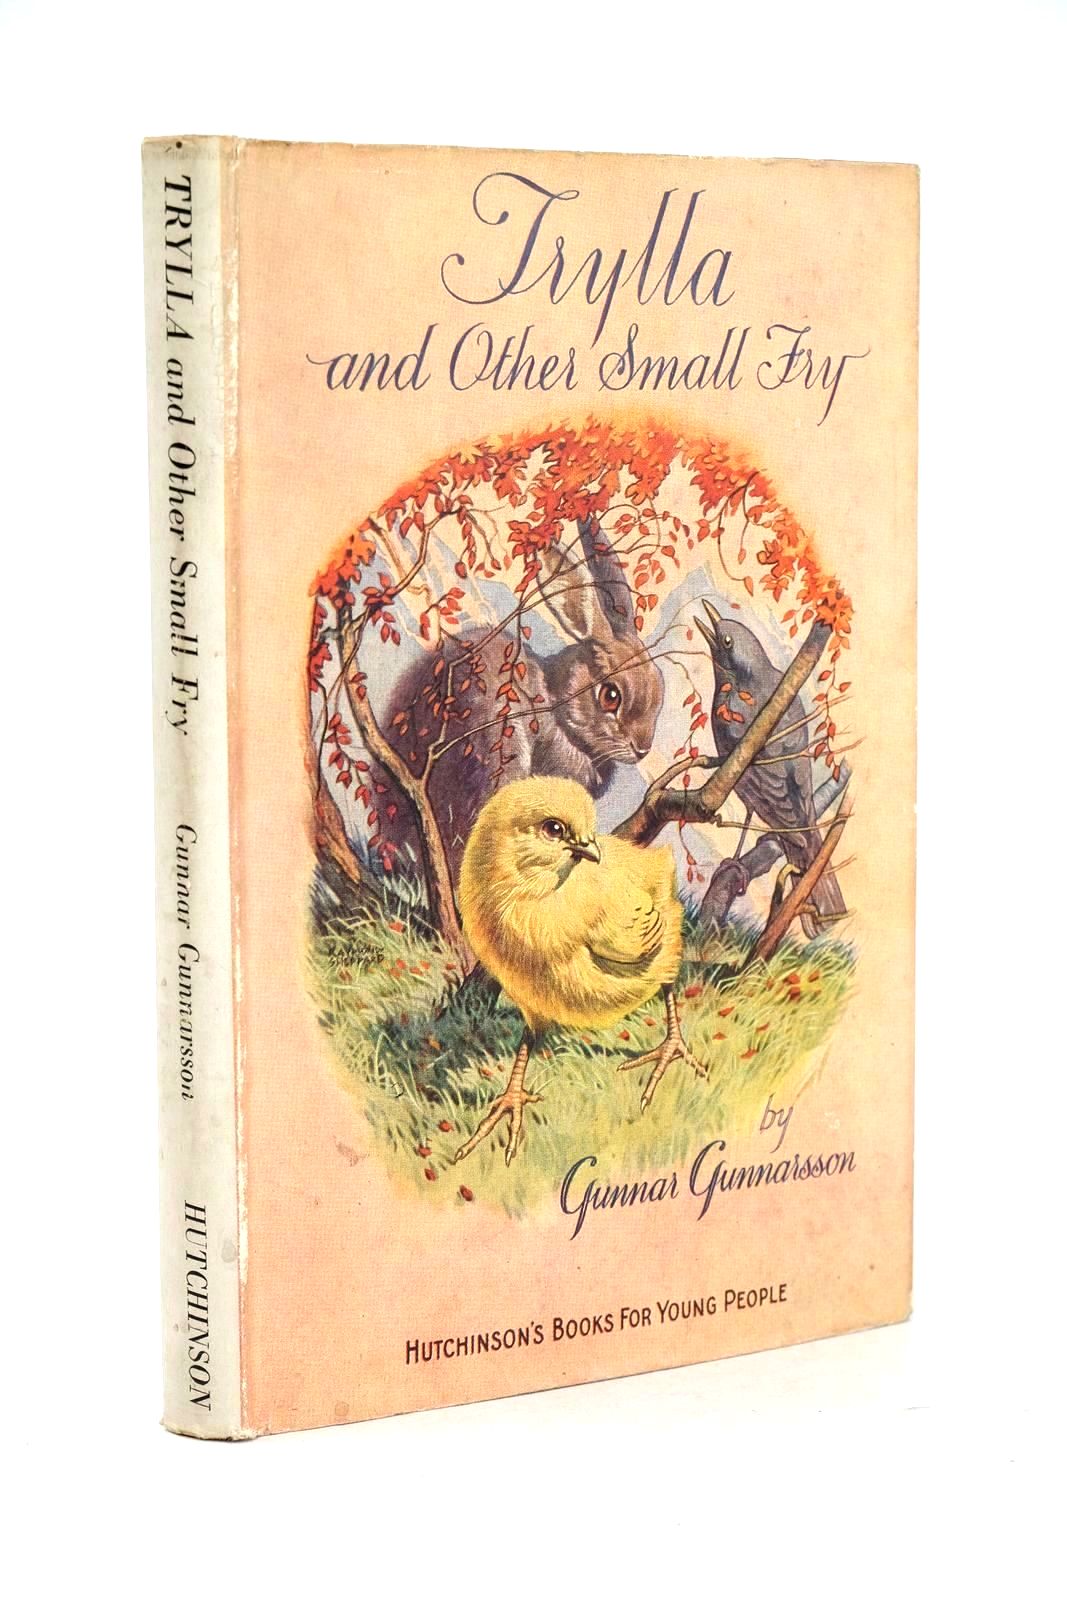 Photo of TRYLLA AND OTHER SMALL FRY written by Gunnarsson, Gunnar illustrated by Sheppard, Raymond published by Hutchinson's Books for Young People (STOCK CODE: 1325810)  for sale by Stella & Rose's Books